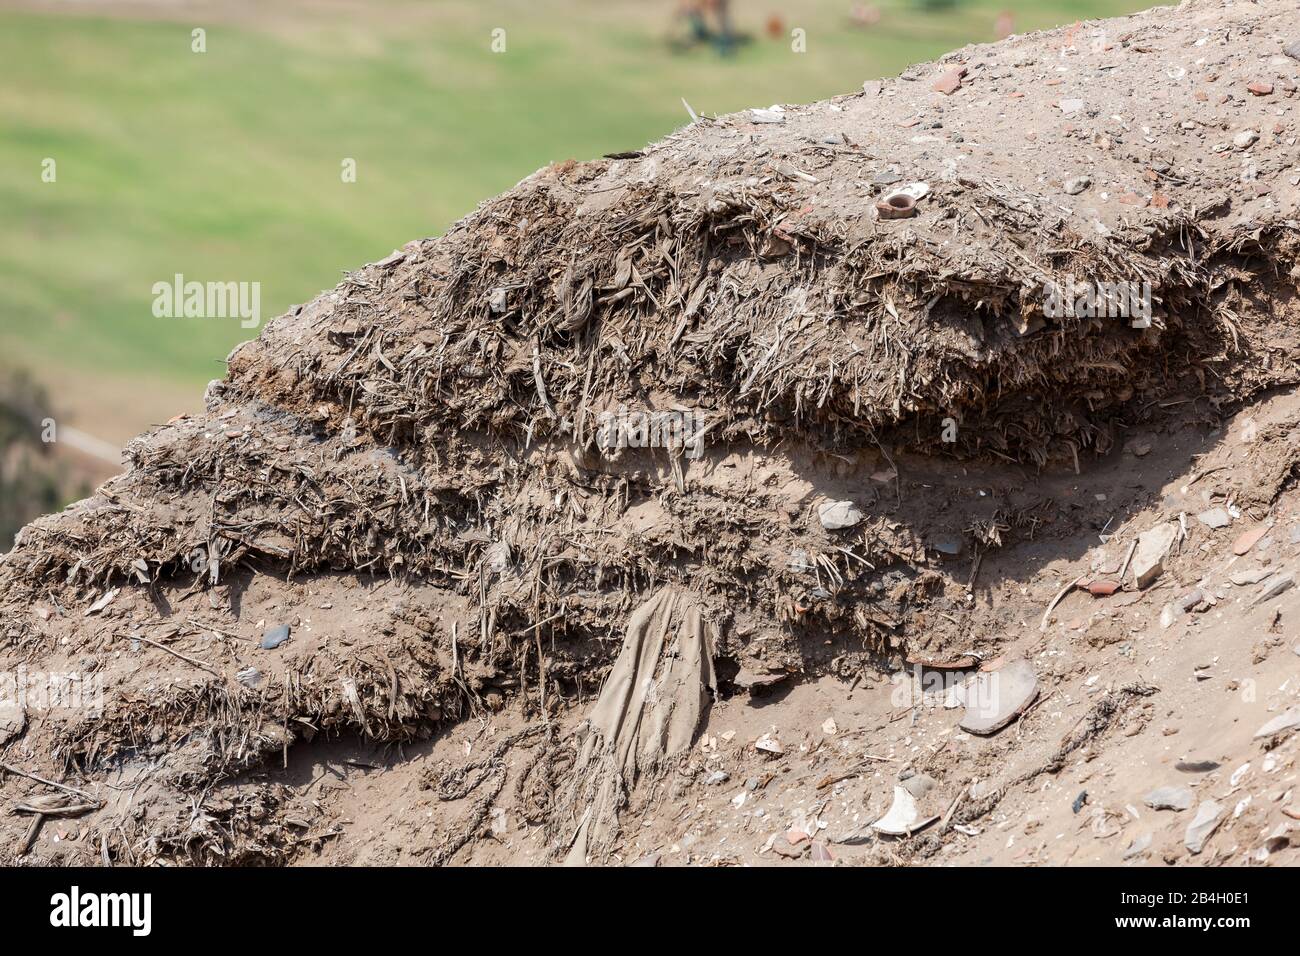 fragments of cloth and bone remains from past civilizations laying on the desert sand in the archeological site of Pachacamac, Peru. Stock Photo